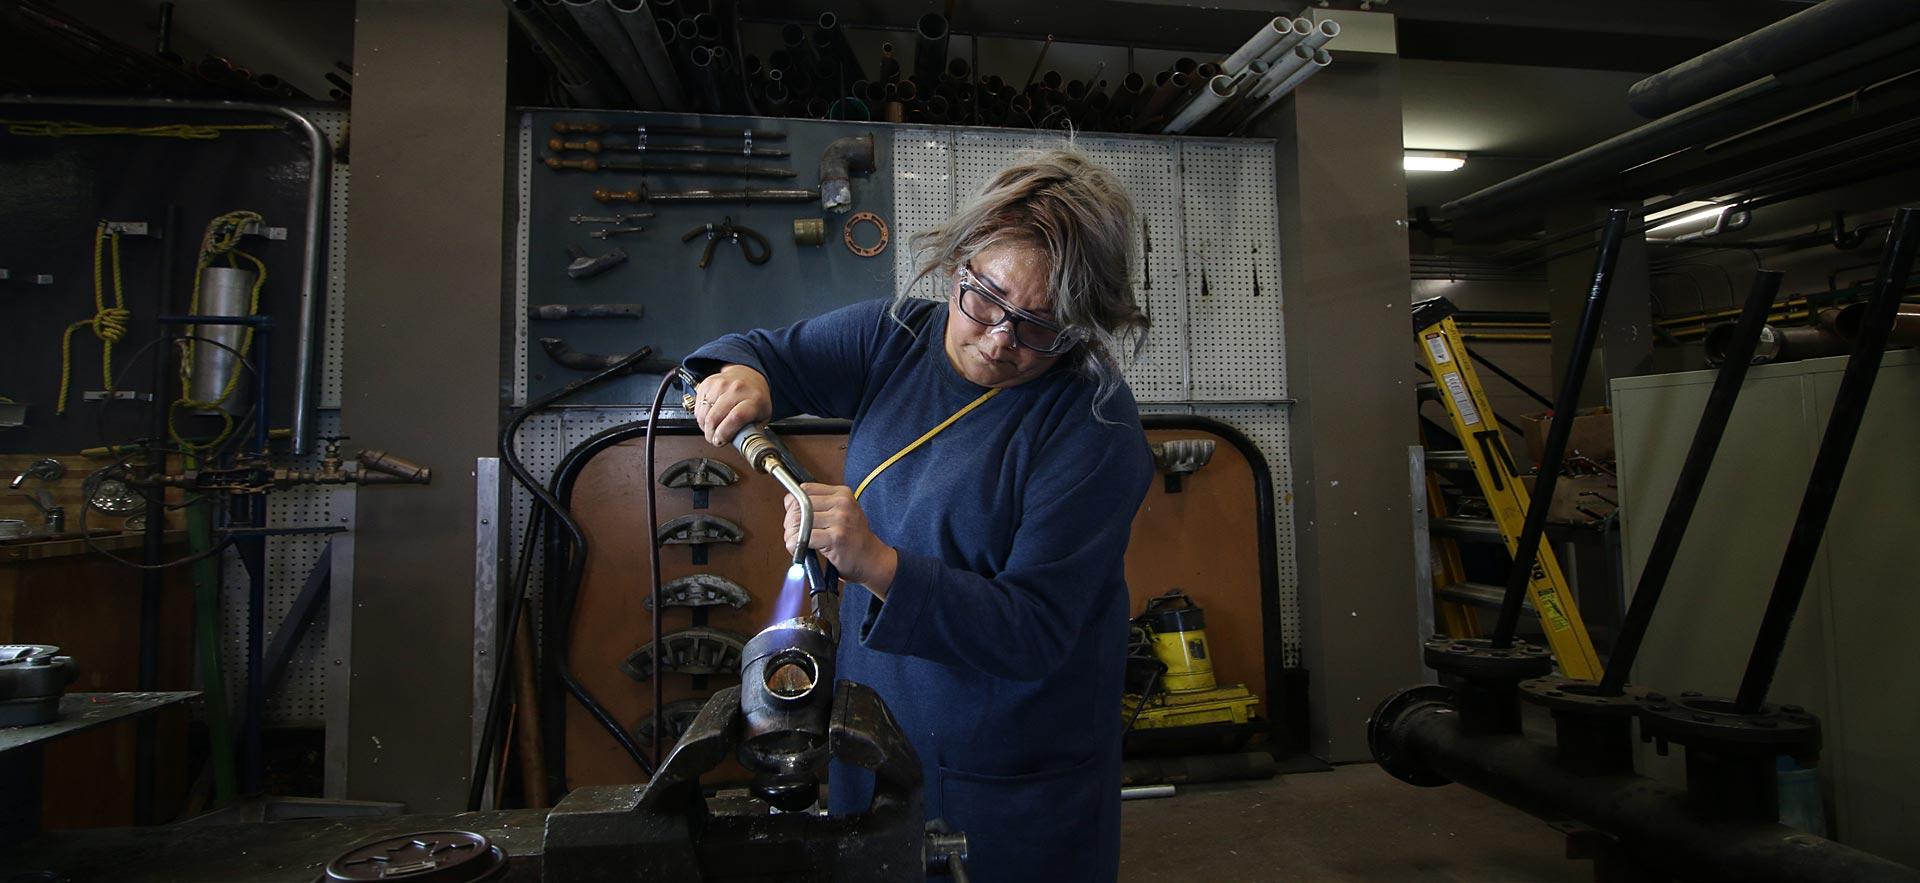 One female Pre-Trades and Technology student works on metal fabrication.